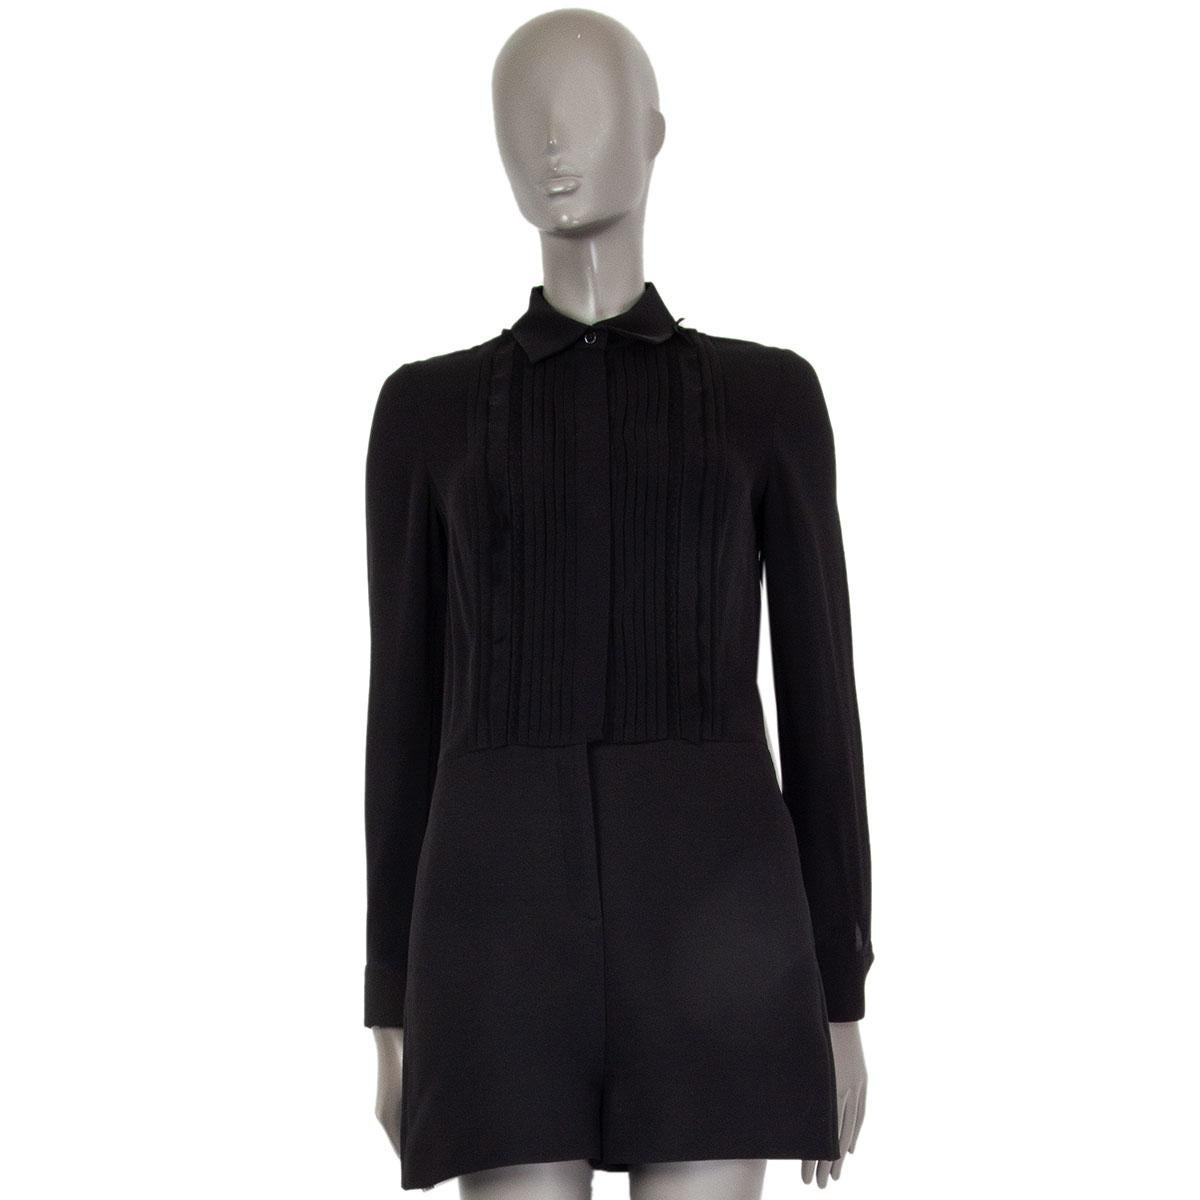 authentic Valentino long-sleeve romper with a ruched shirt top part in black silk (100%). Hot pants are made of black virgin wool (65%) and silk (35%). Opens with buttons and a zipper at front. Has been worn and the hidden buttons have a bit color